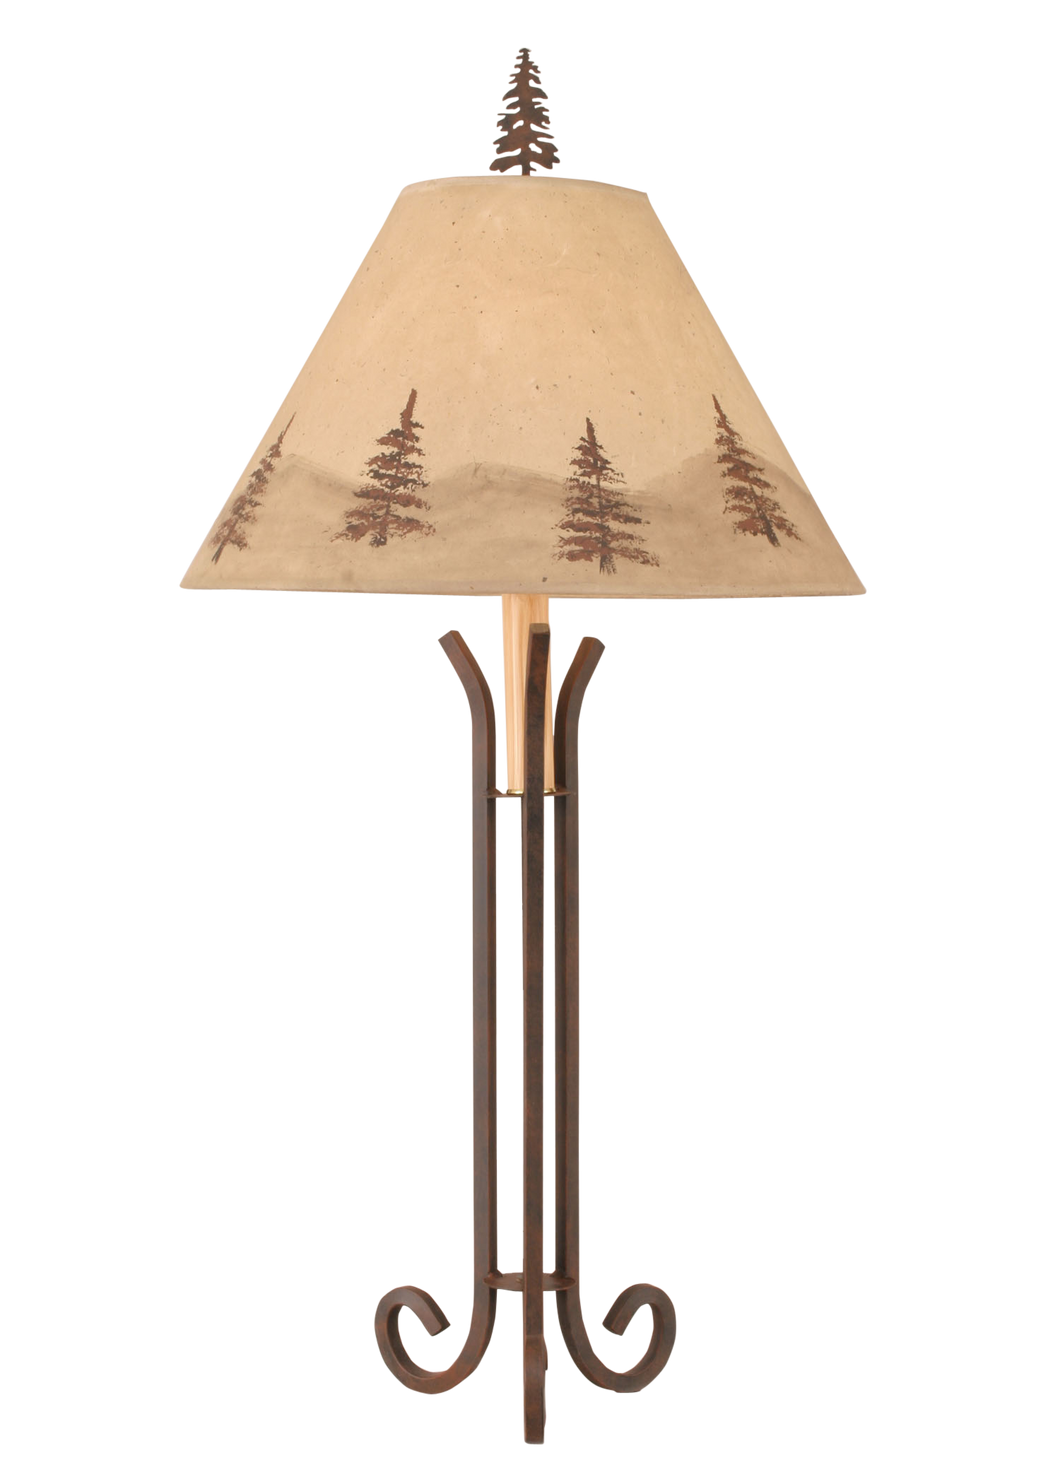 Rust Iron 3 Footed Table Lamp w/ Pine Tree Shade